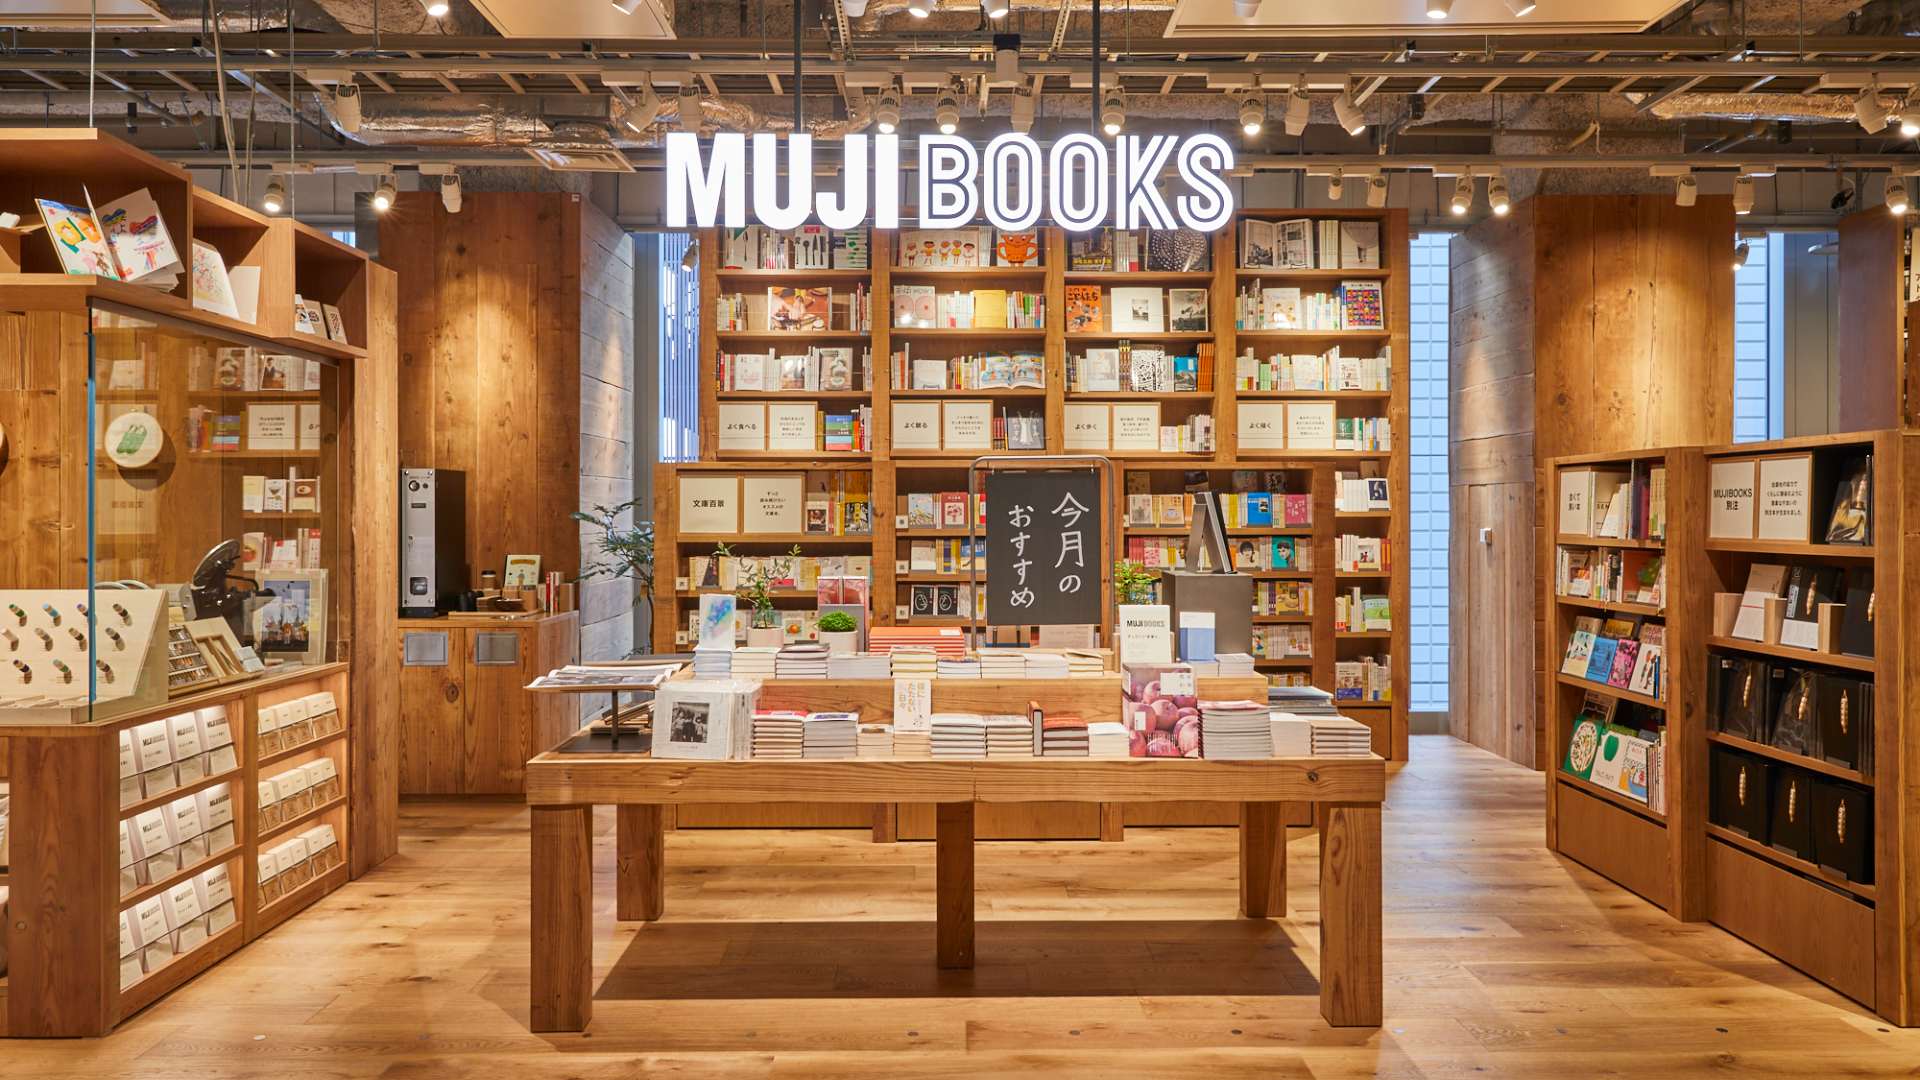 Chadstone Will Soon Be Home to Australia's First Ever Muji 'Concept' Store